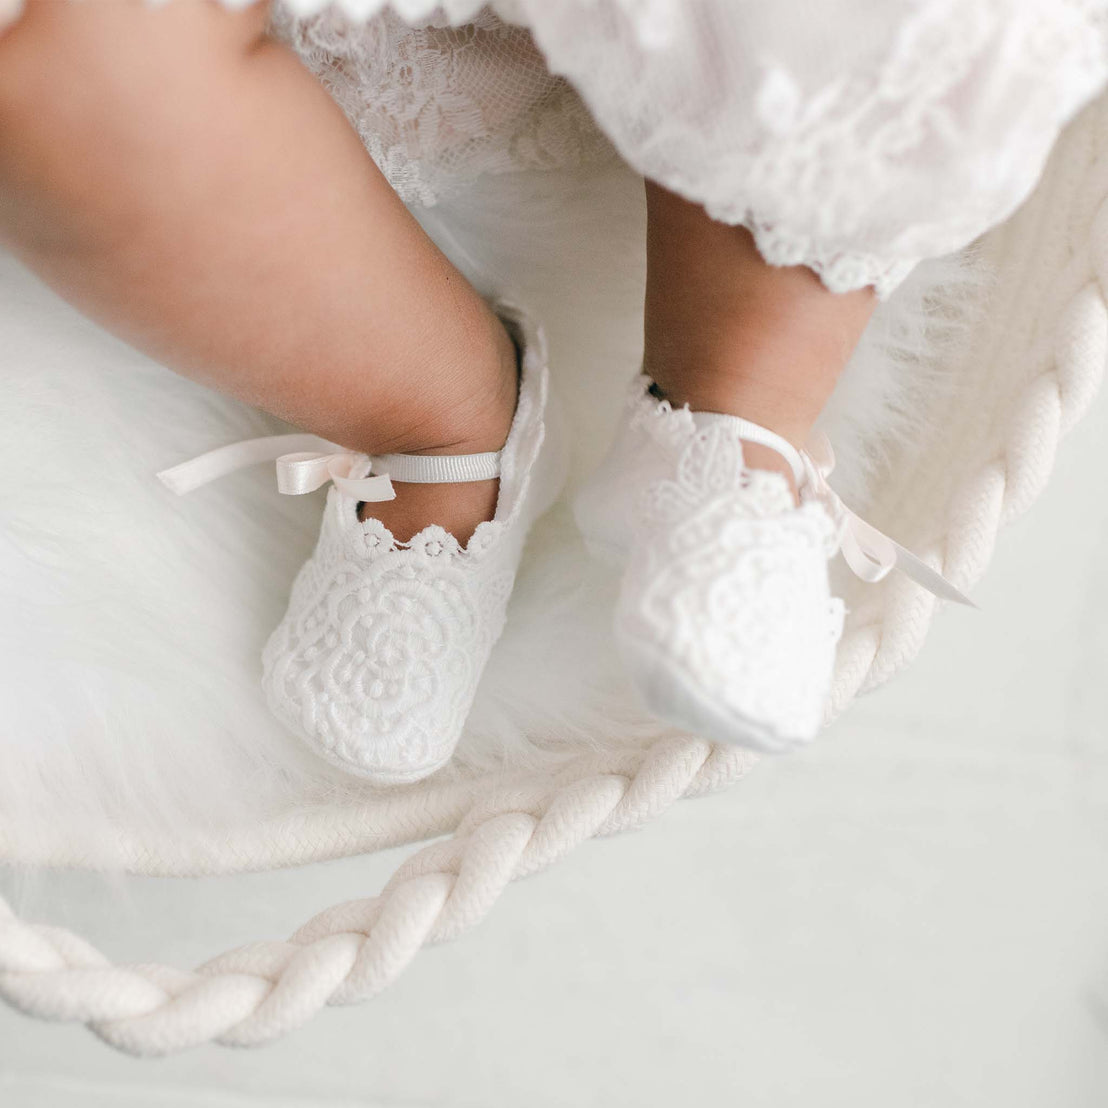 Close-up of a baby's feet in Juliette Baby Shoes, resting on a soft, furry white blanket with luxury handcrafted braided rope encircling the blanket.